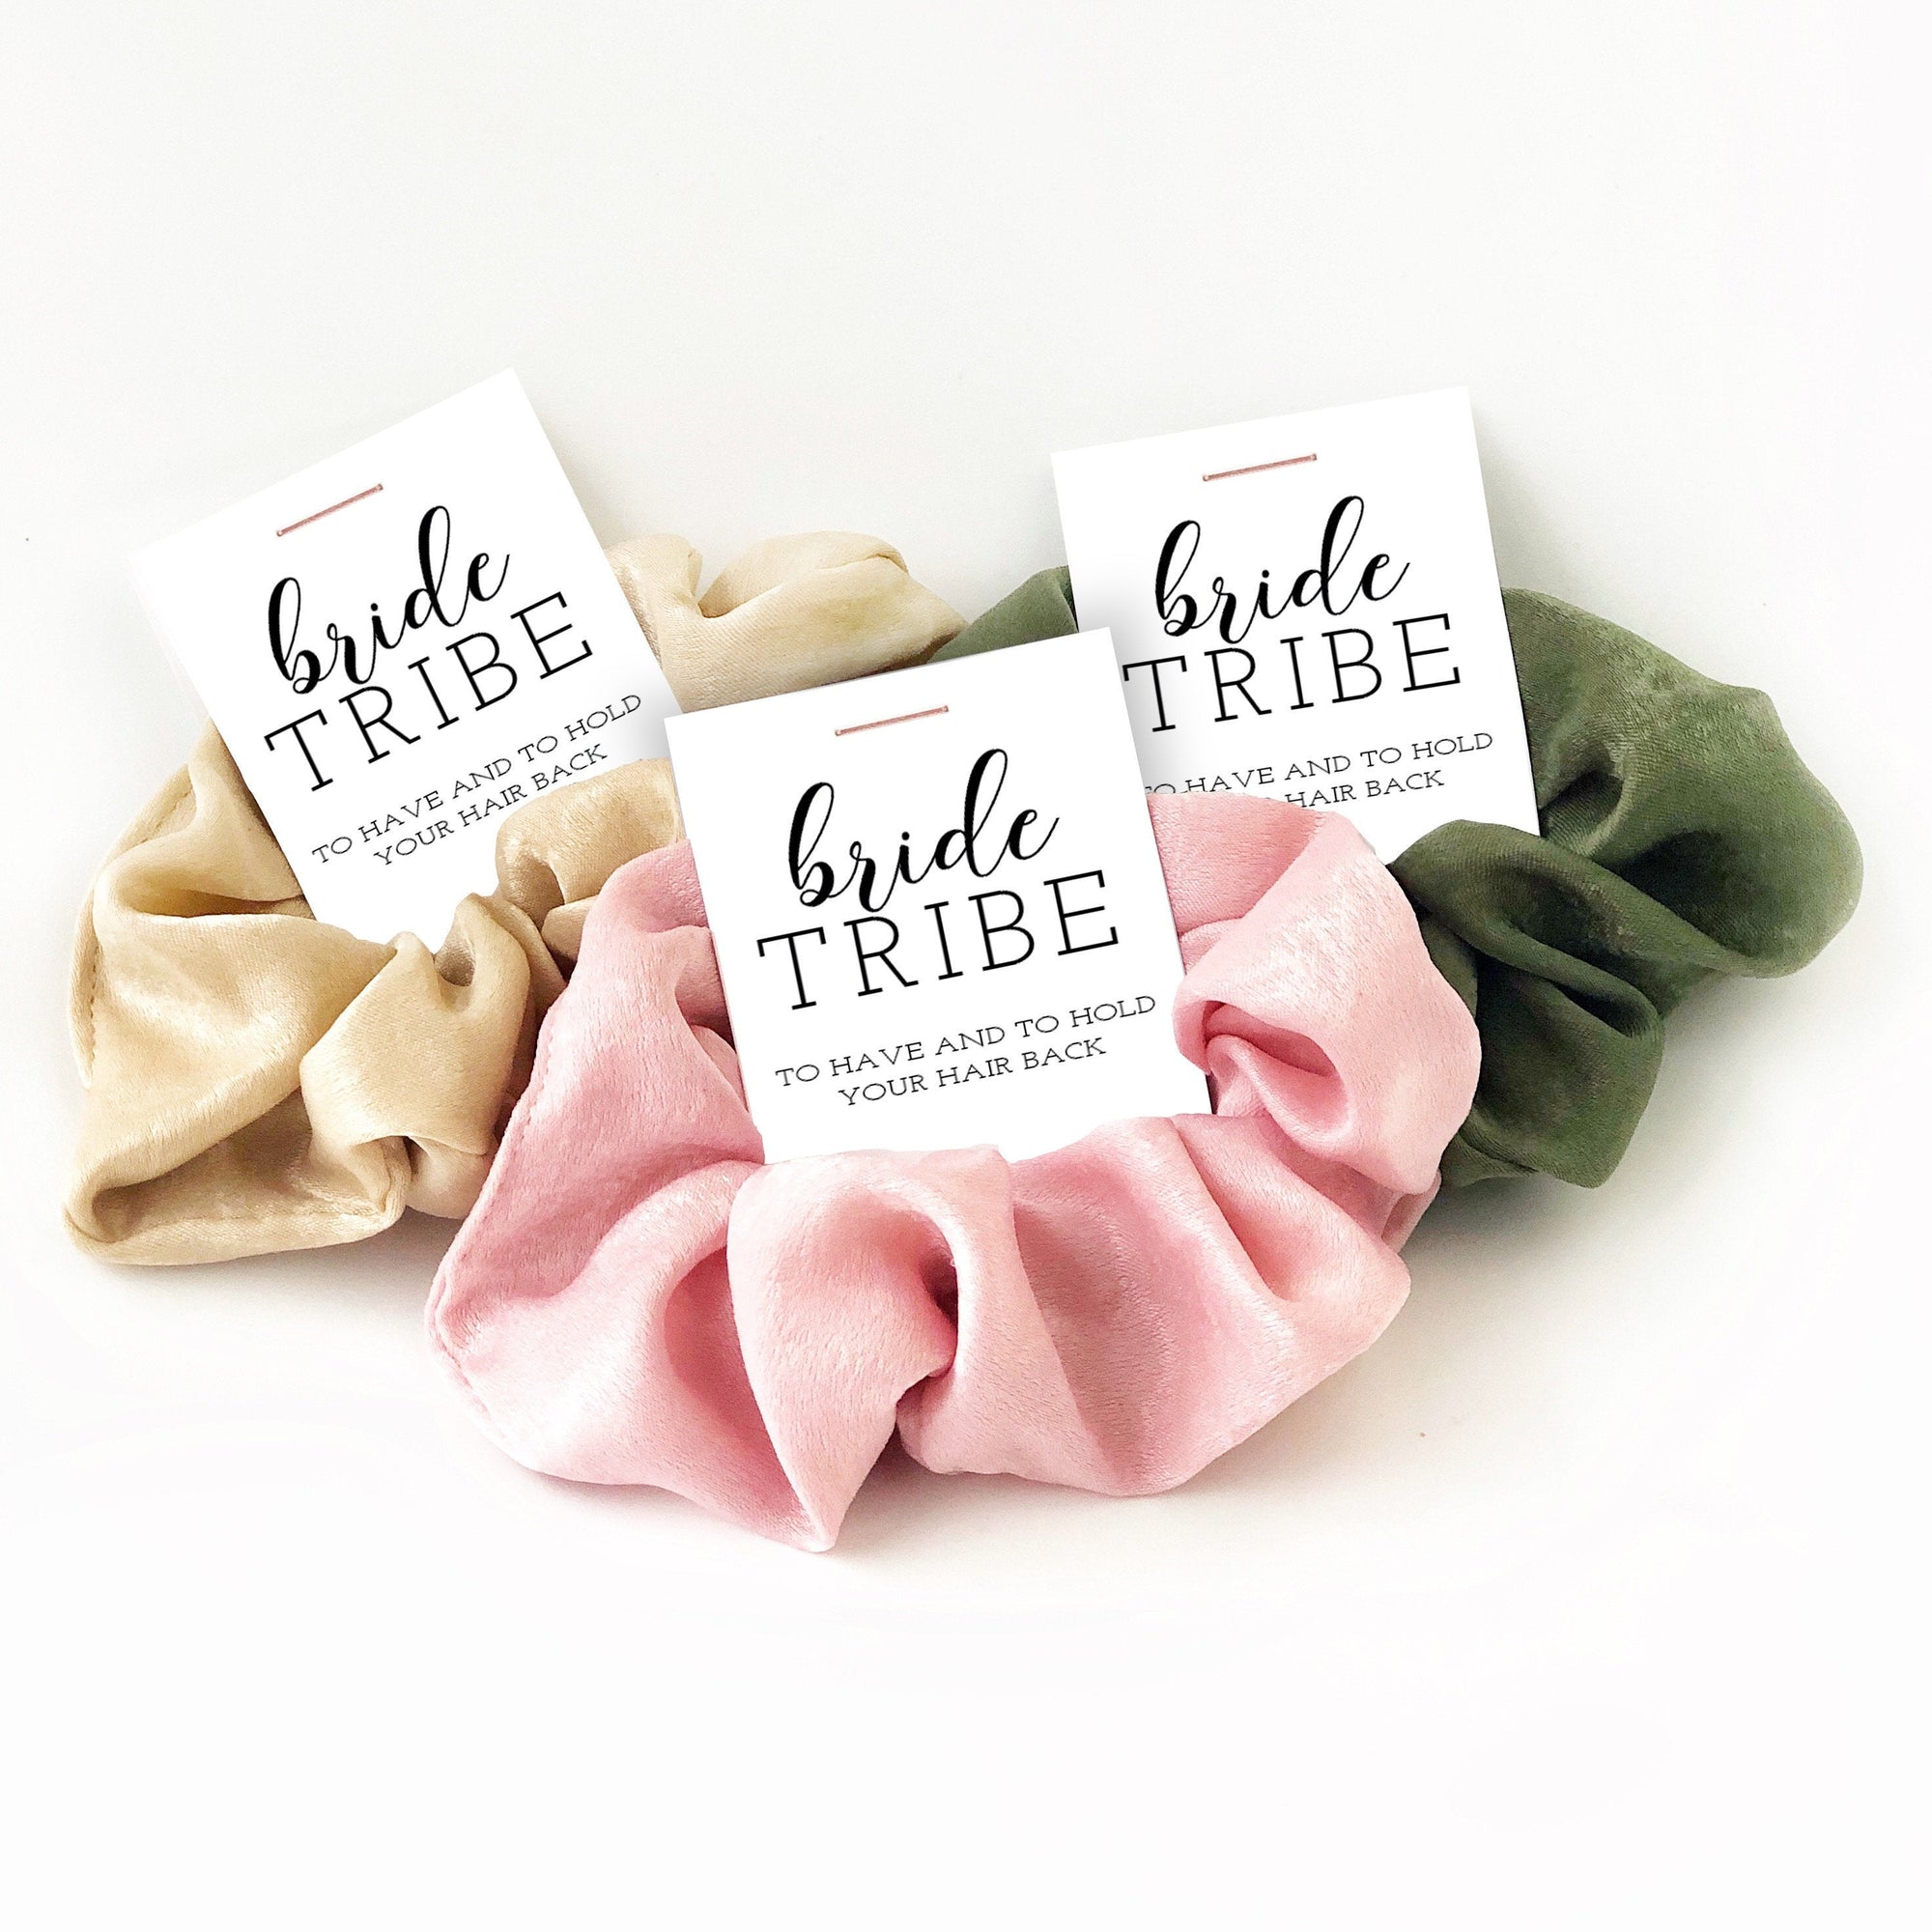 Bride Tribe Bridesmaid and Bridal Party Gifts, Bachelorette Party